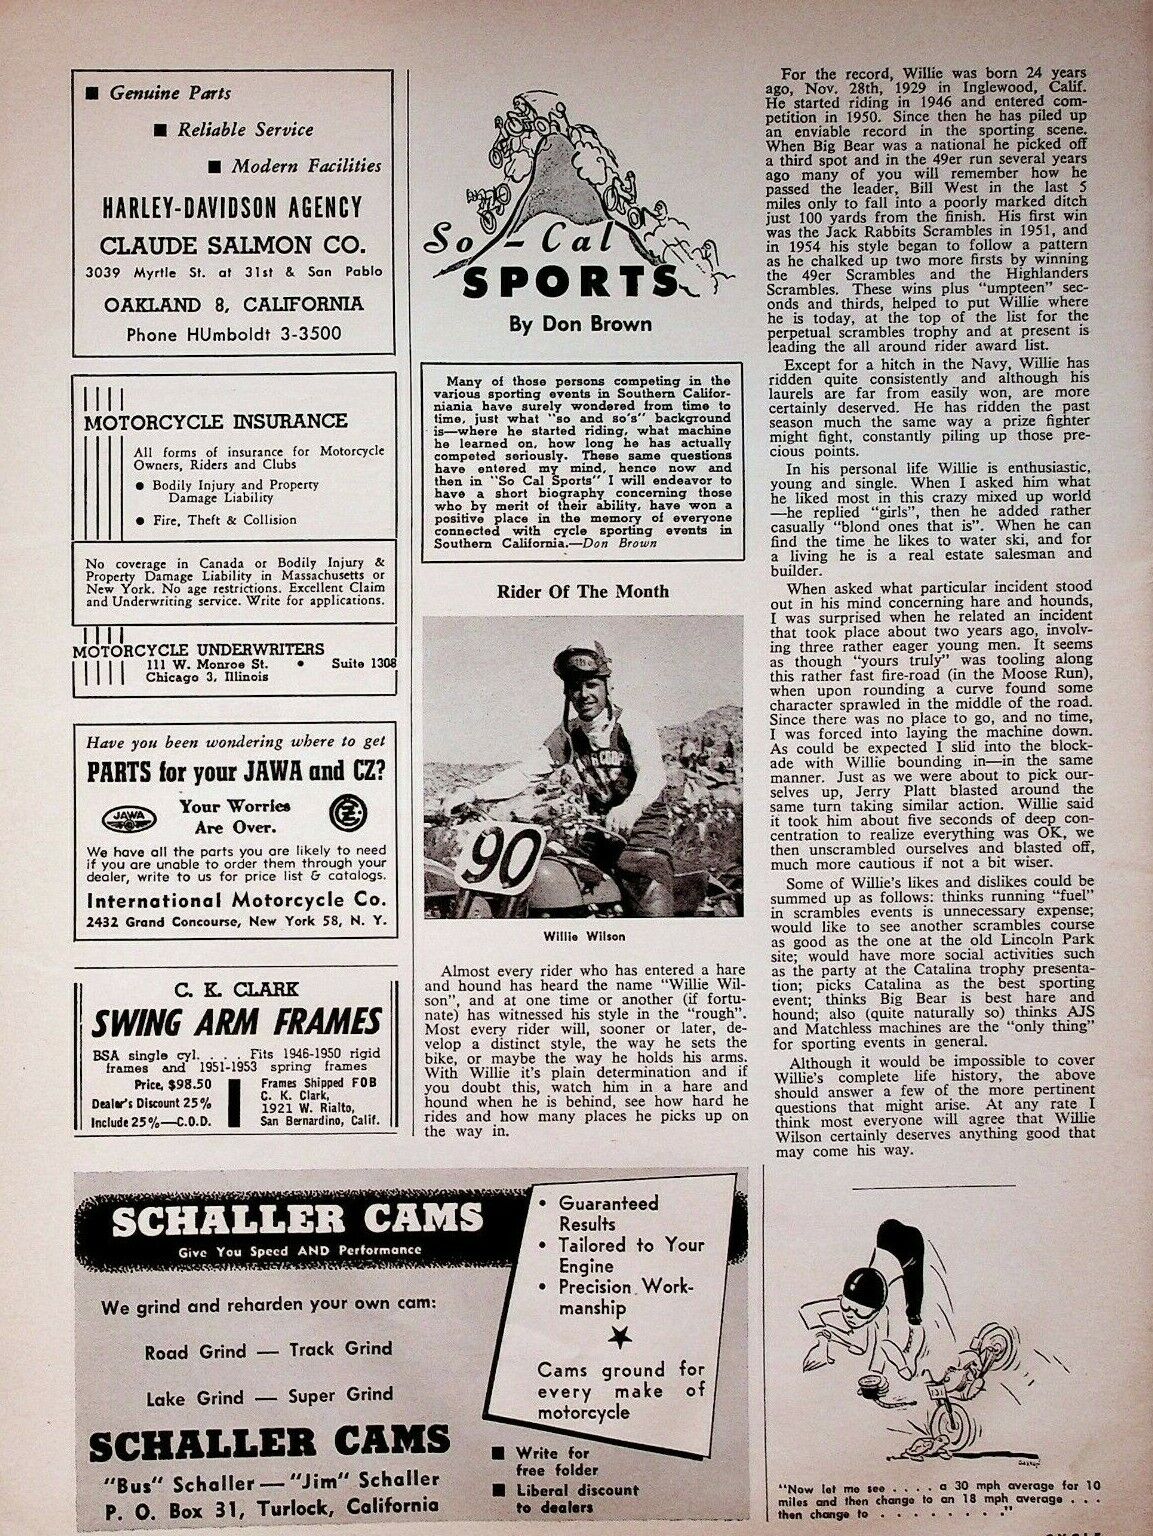 1954 Willie Wilson Motorcycle Rider of the Month - 1-Page Vintage Article